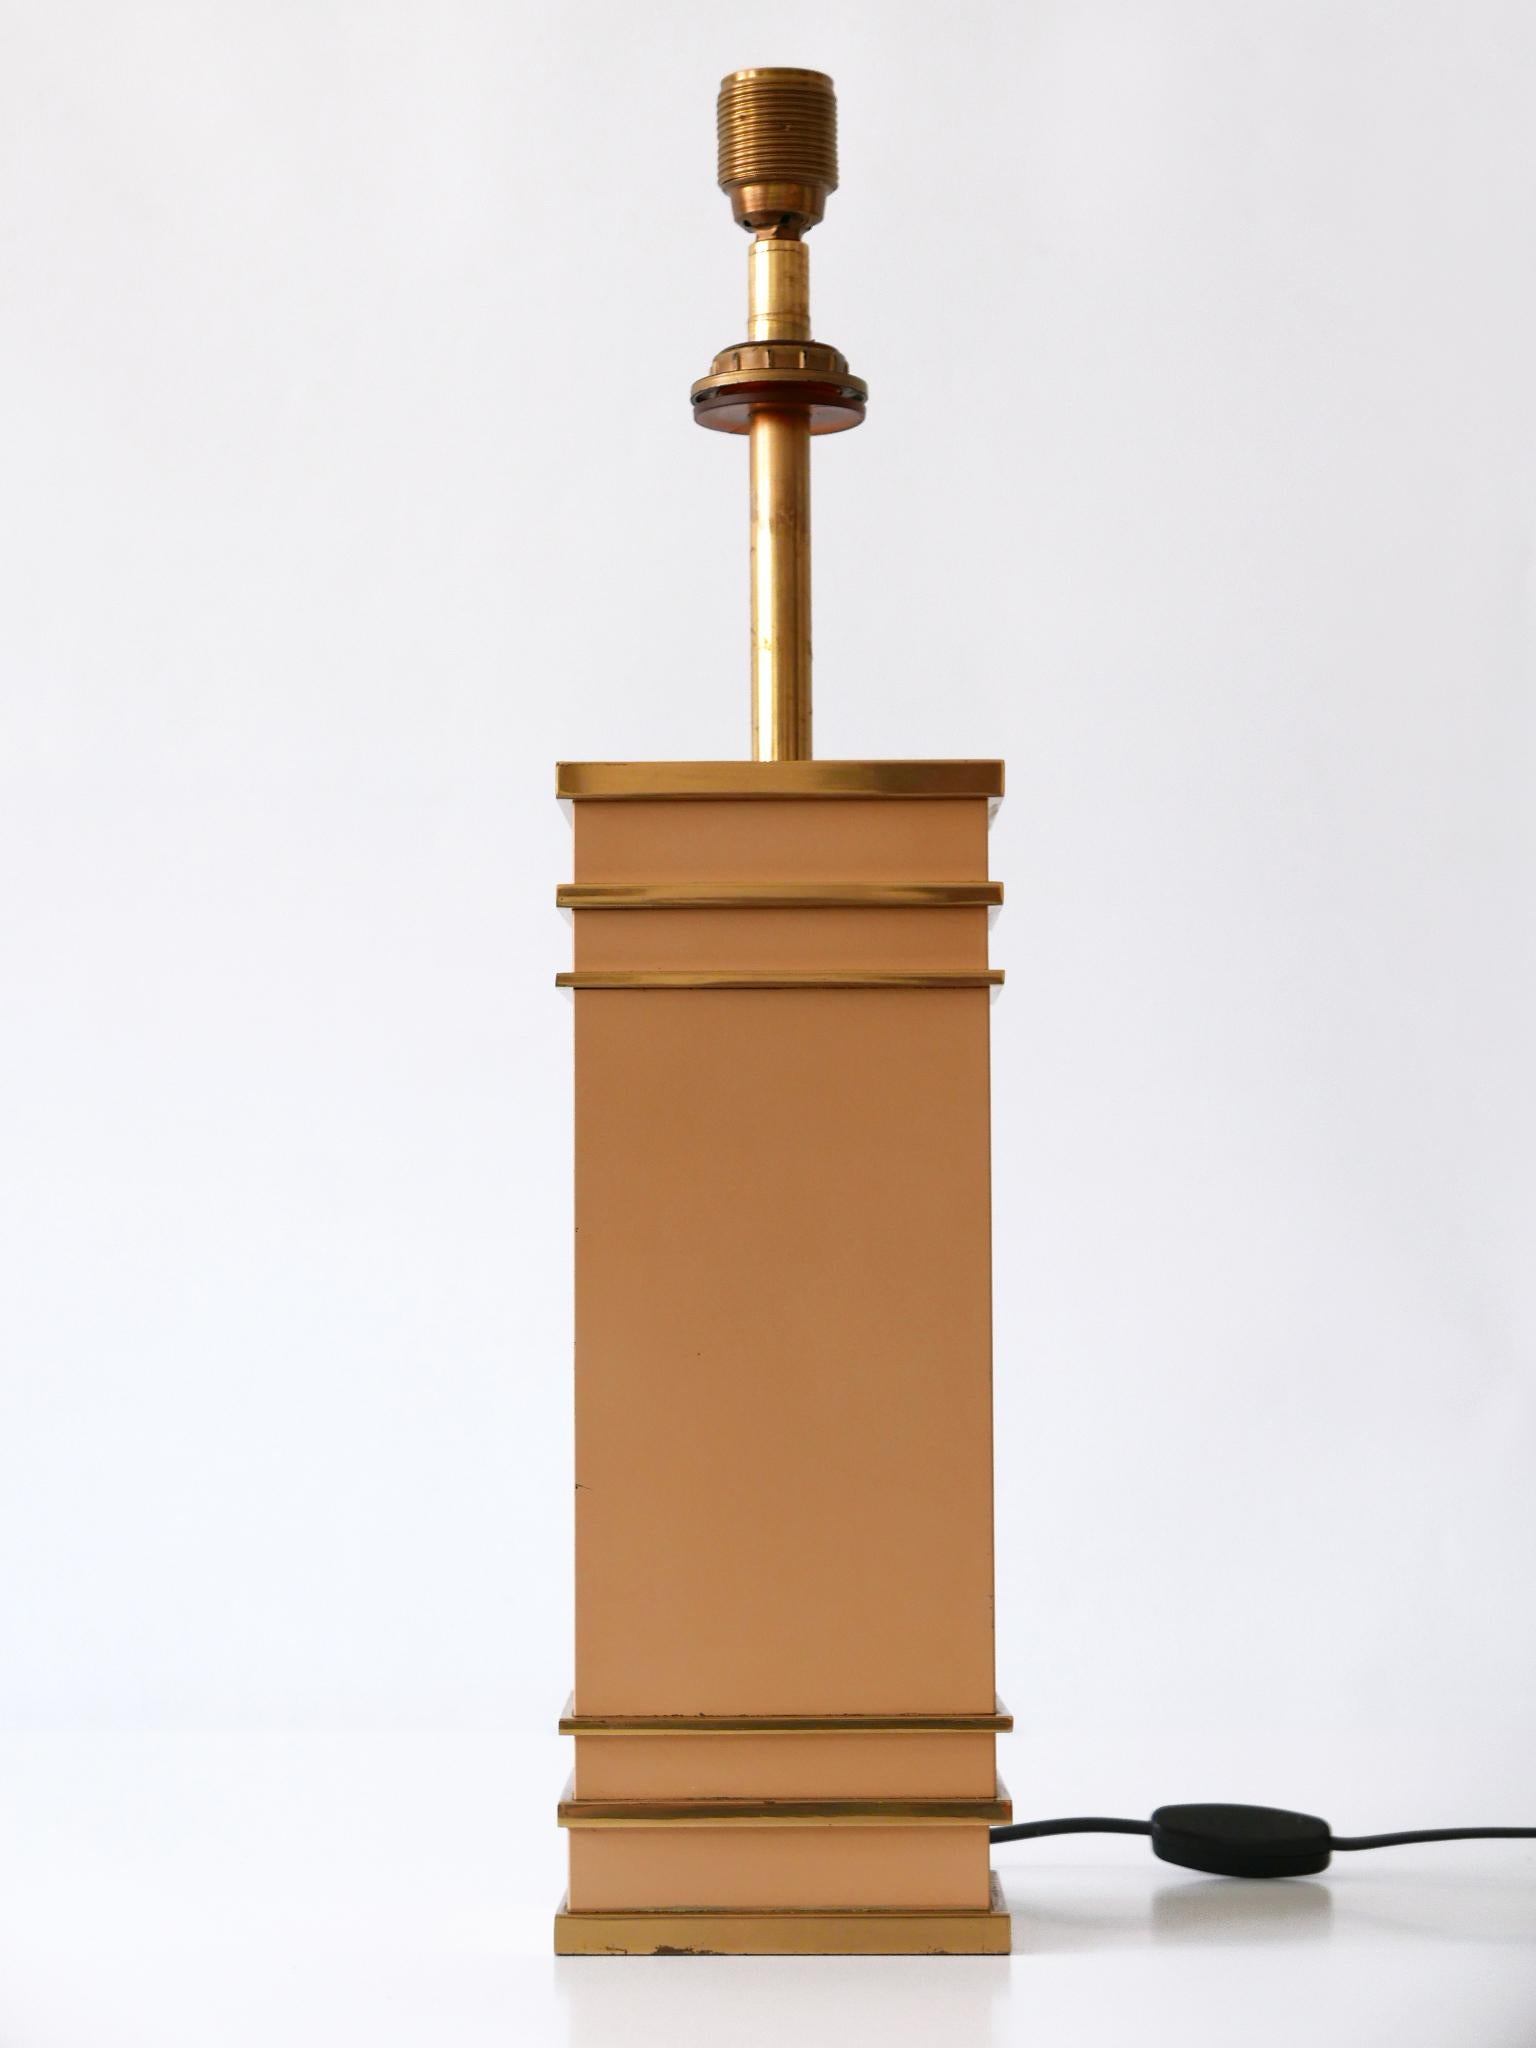 Monumental & exceptional Mid-Century Modern table lamp in heavy, massive brass. Designed and manufactured by Vereinigte Werkstätten, 1960s, Germany.

This sculptural table lamp is executed in massive brass. It comes with an E27 / E26 Edison screw